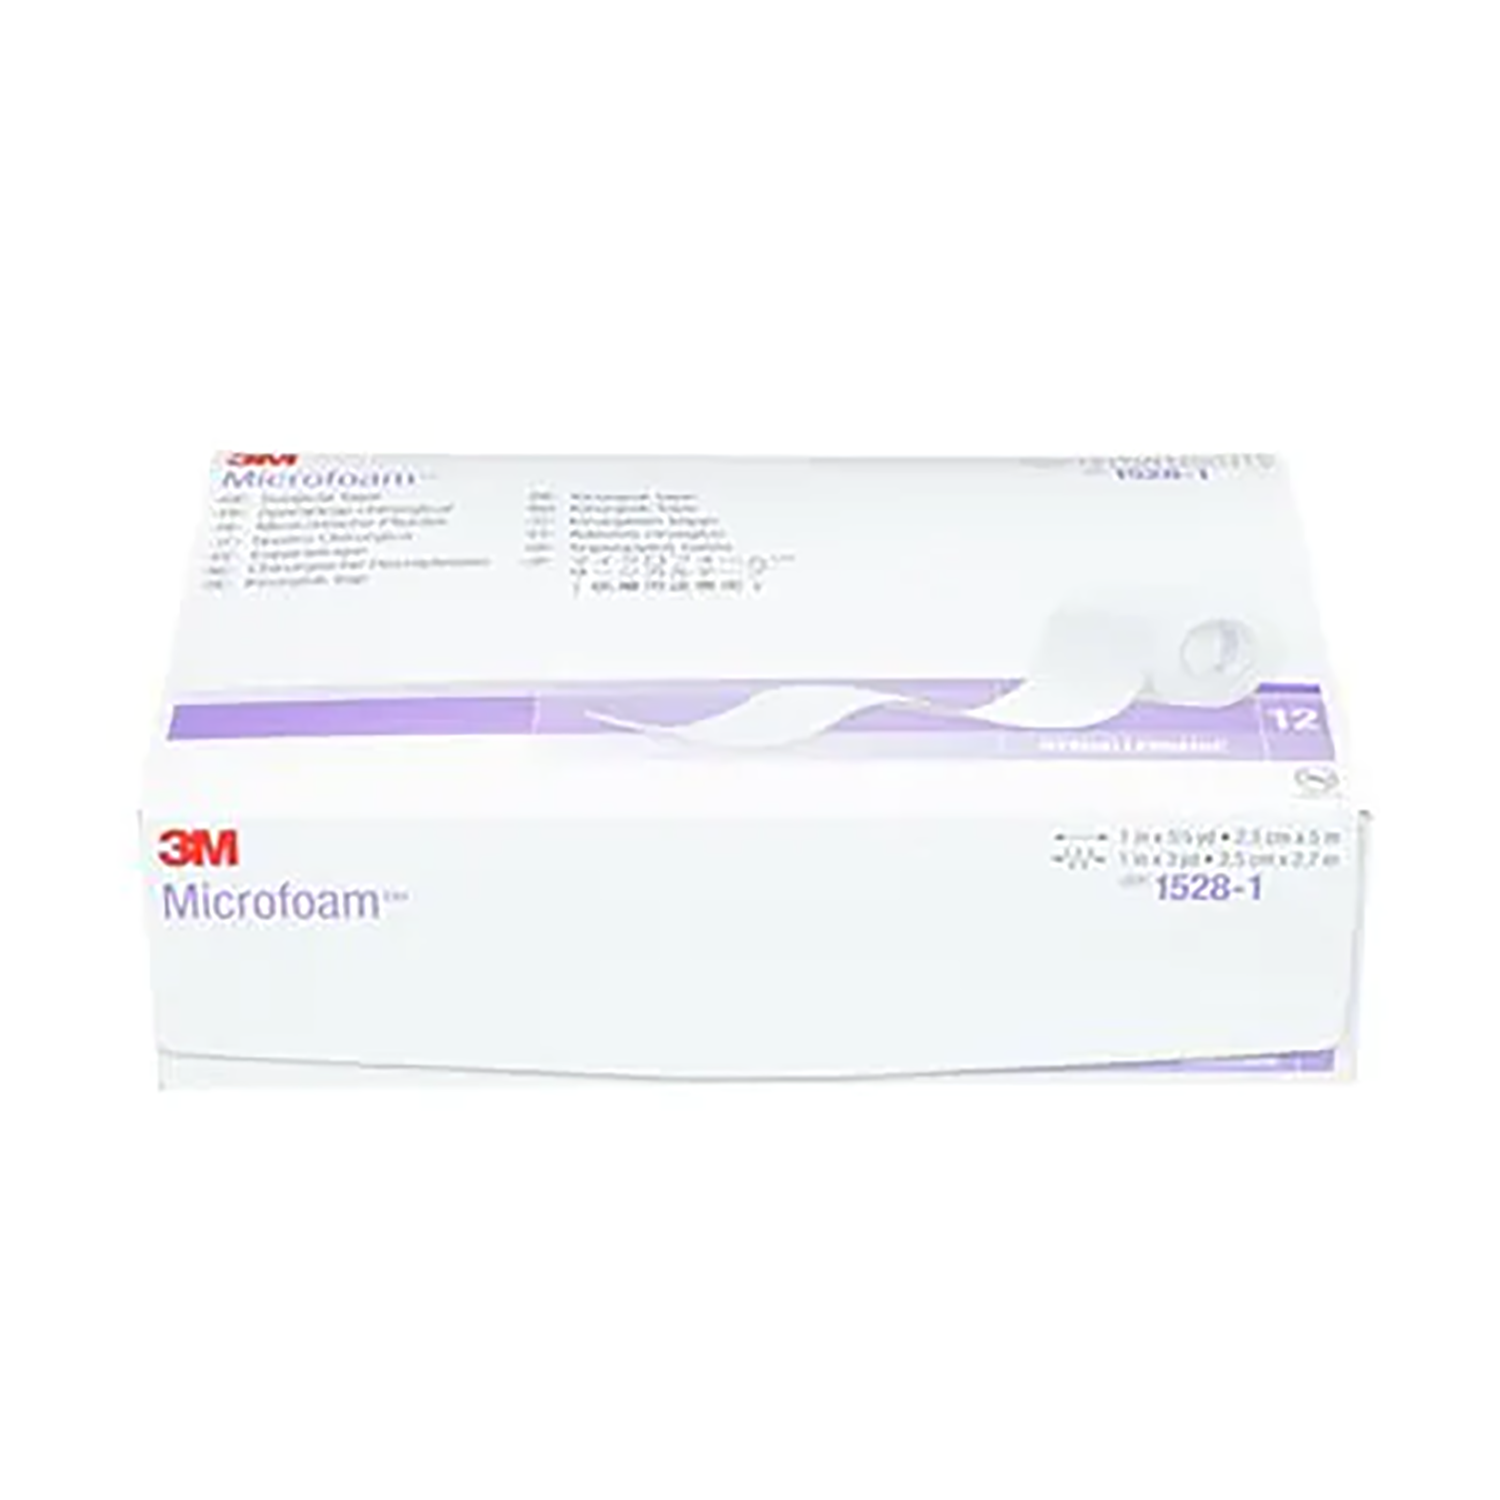 3M Microfoam Surgical Tape | 2.5cm x 5m | Pack of 12 | Short Expiry Date (1)